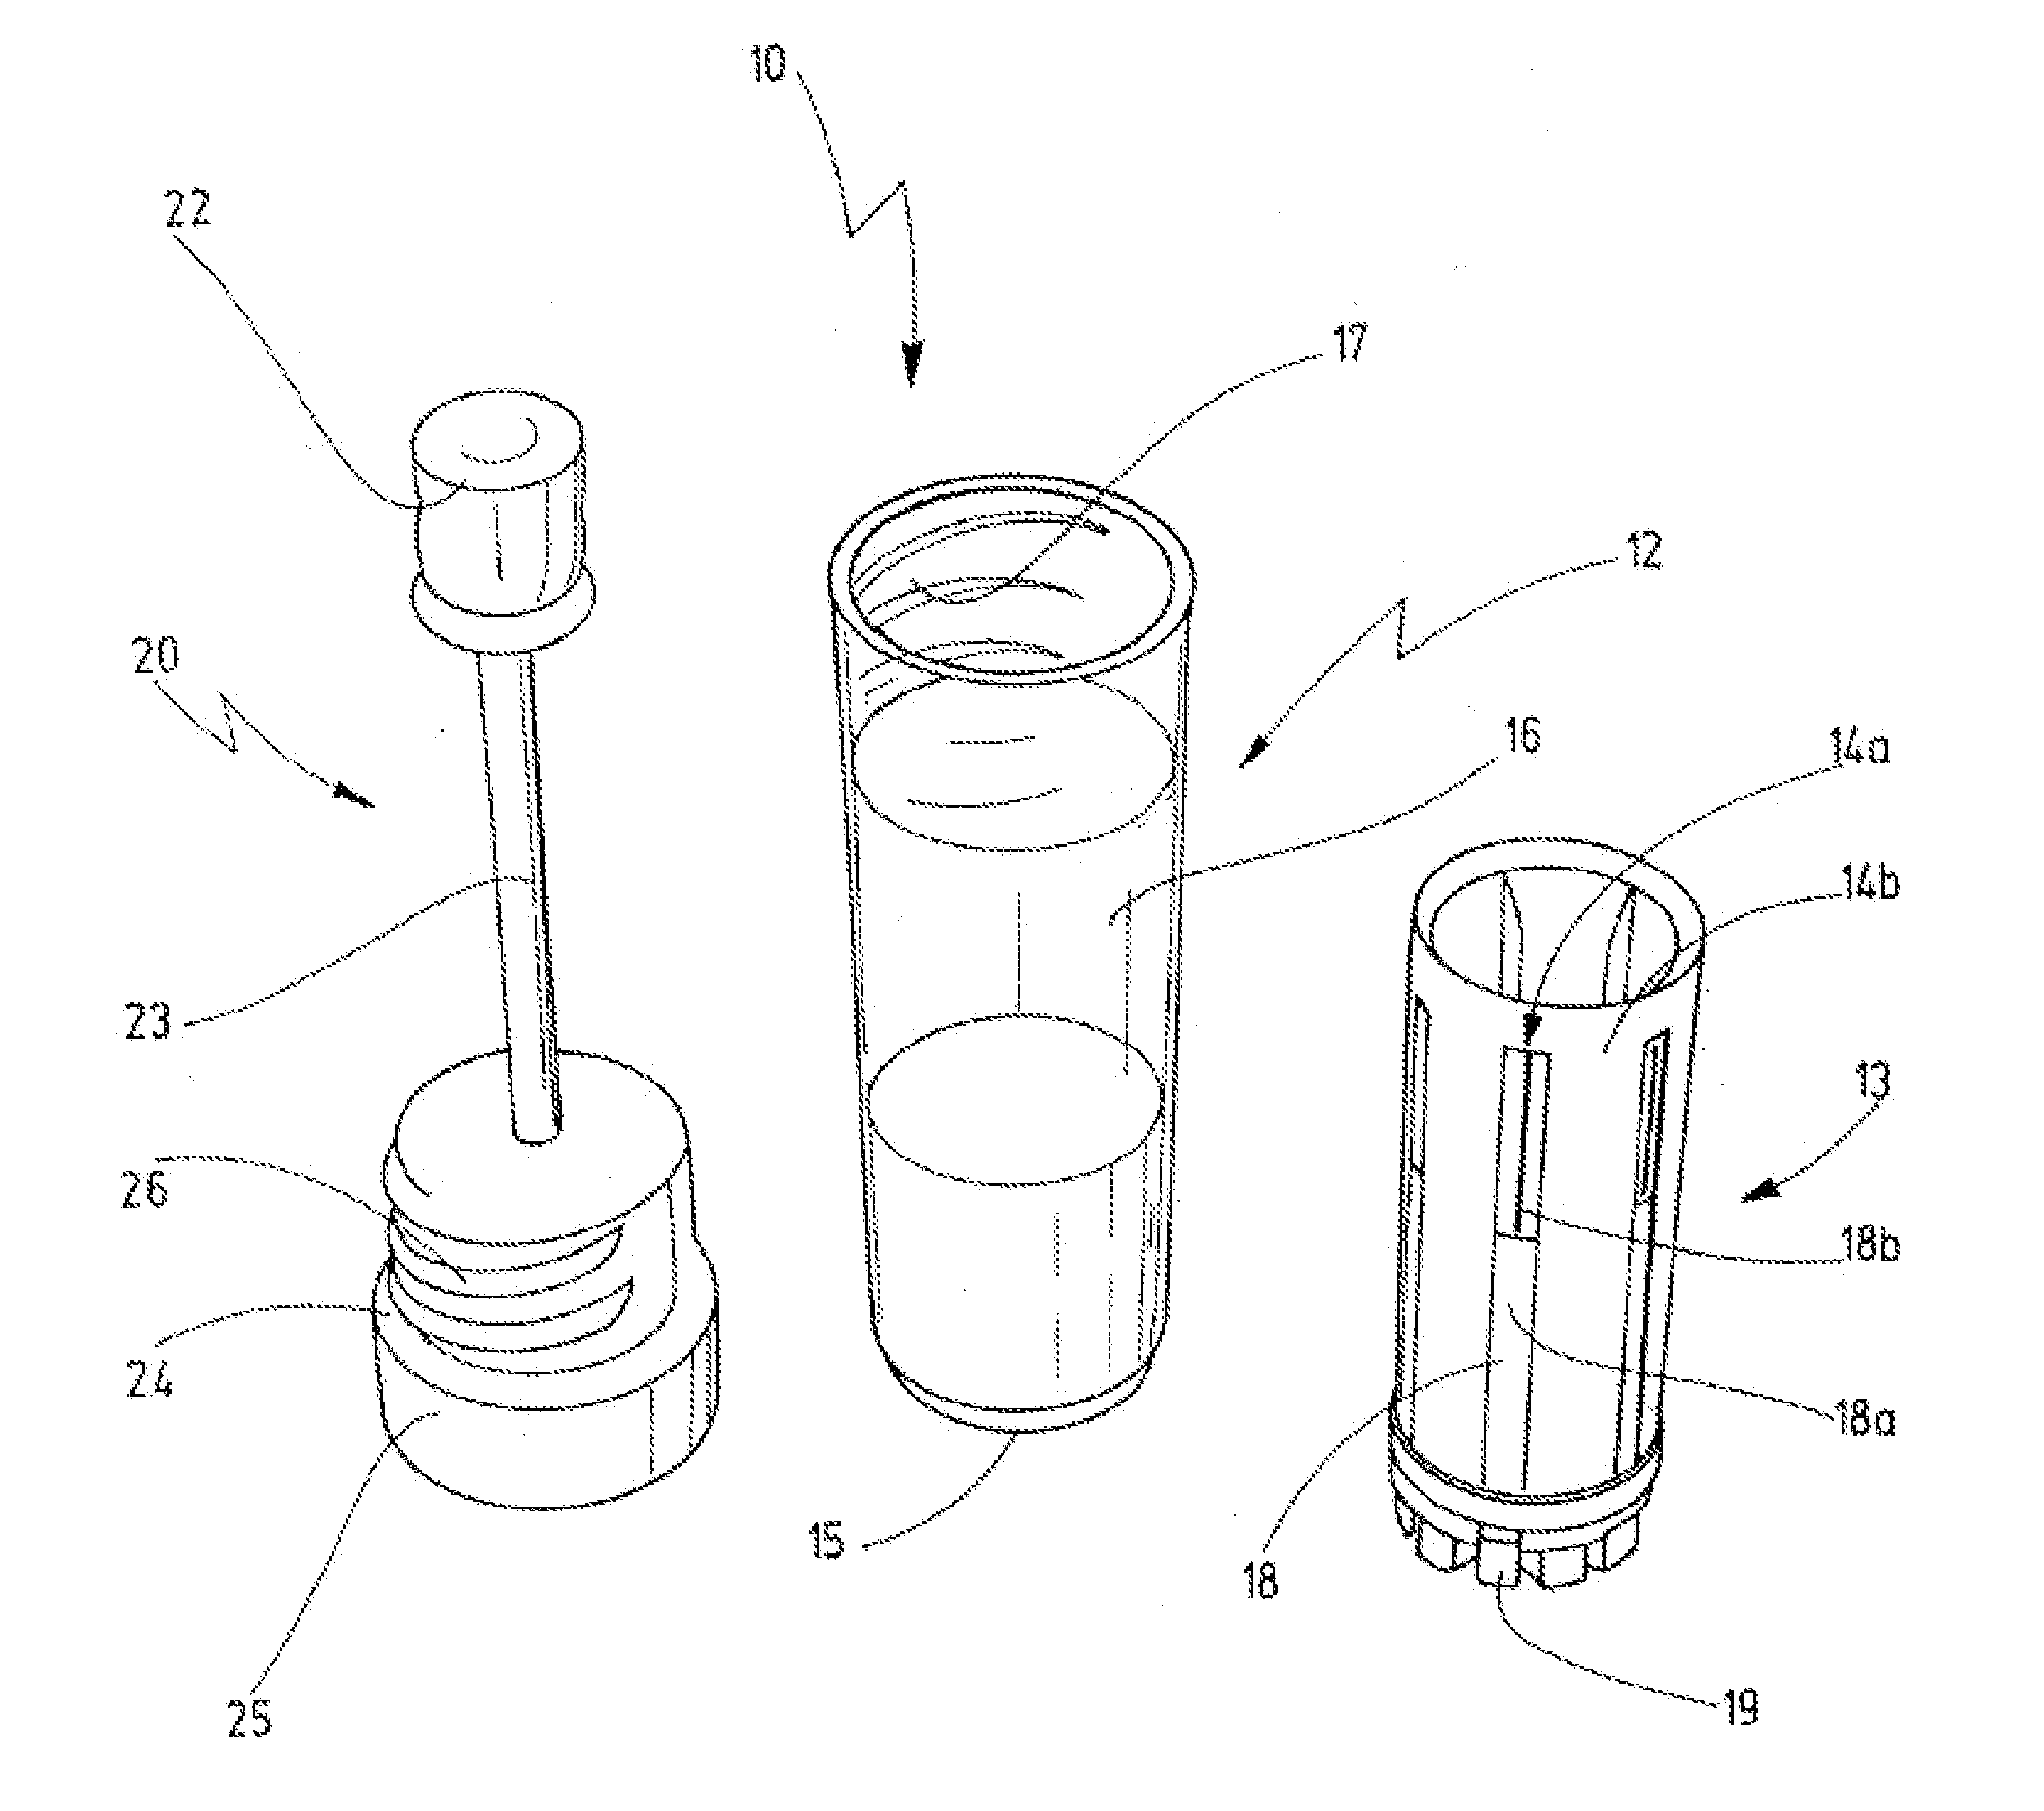 Device for assaying analytes in bodily fluids